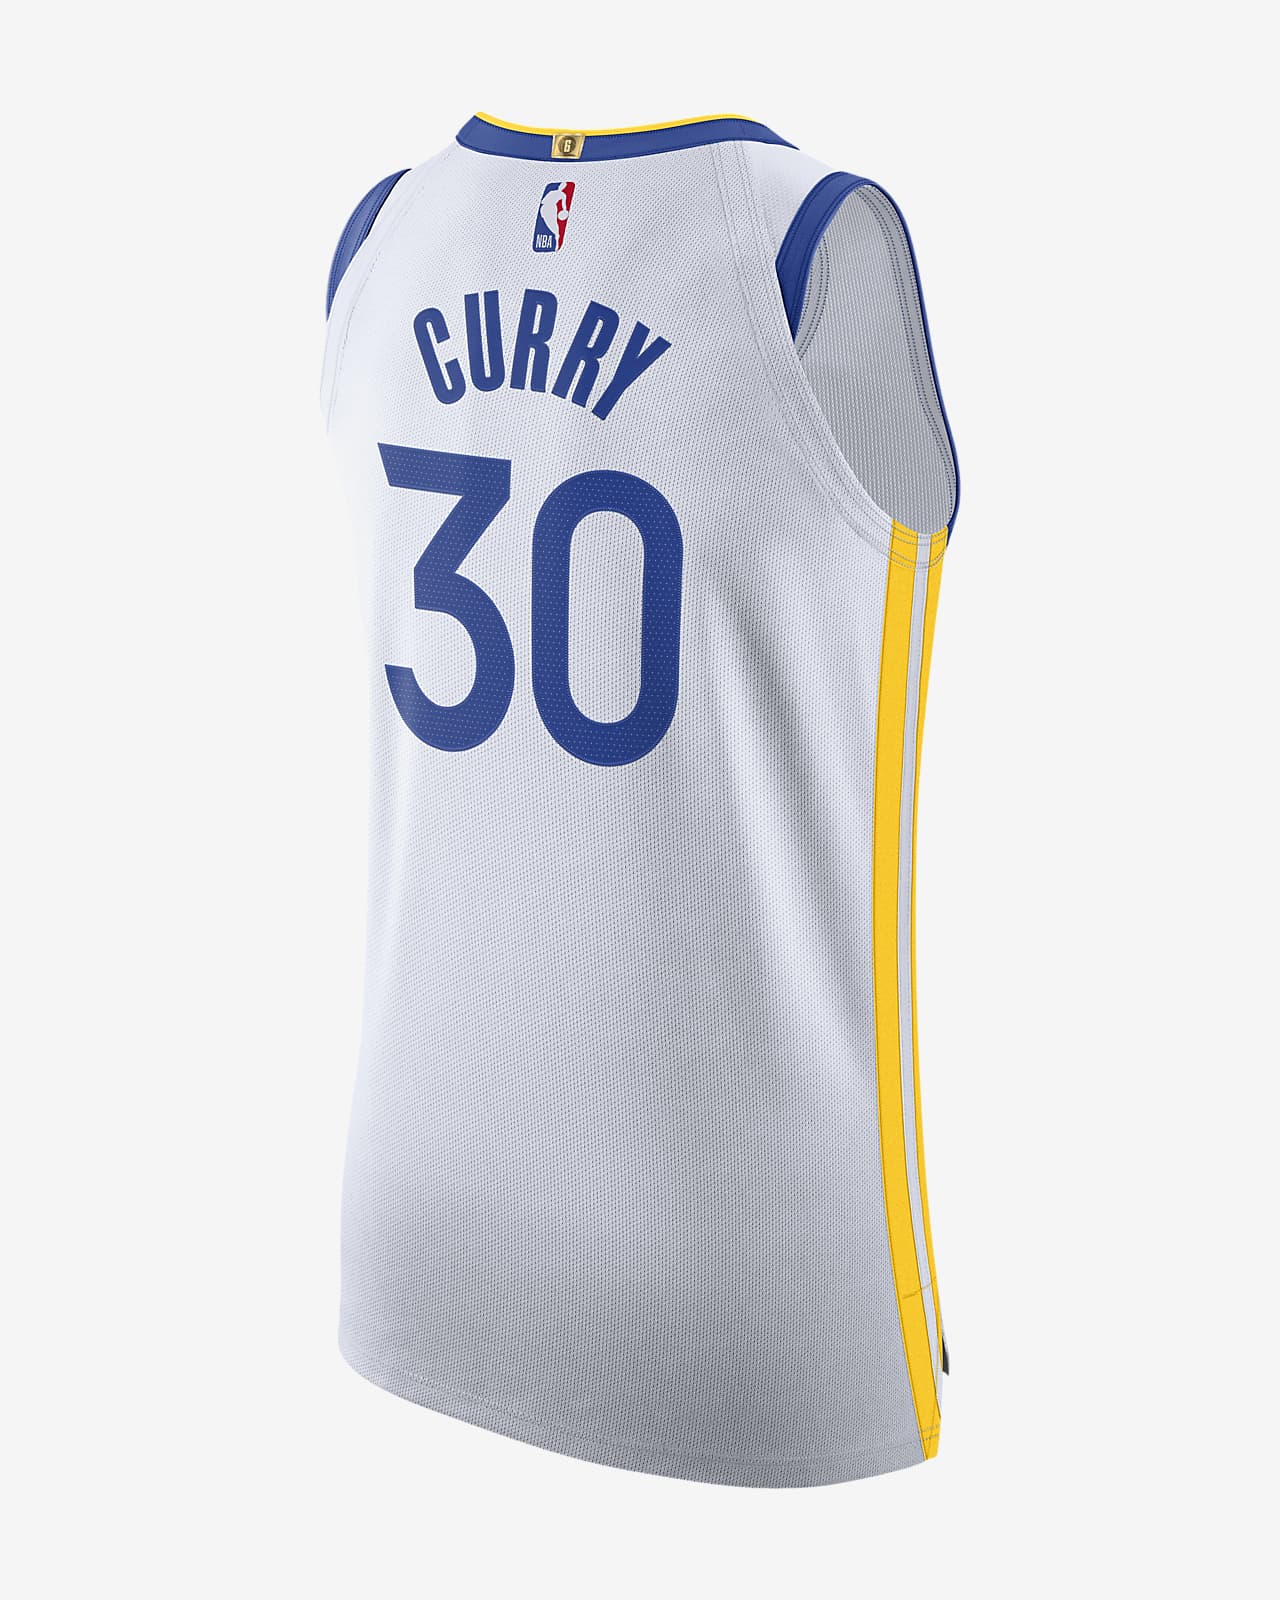 authentic stephen curry jersey